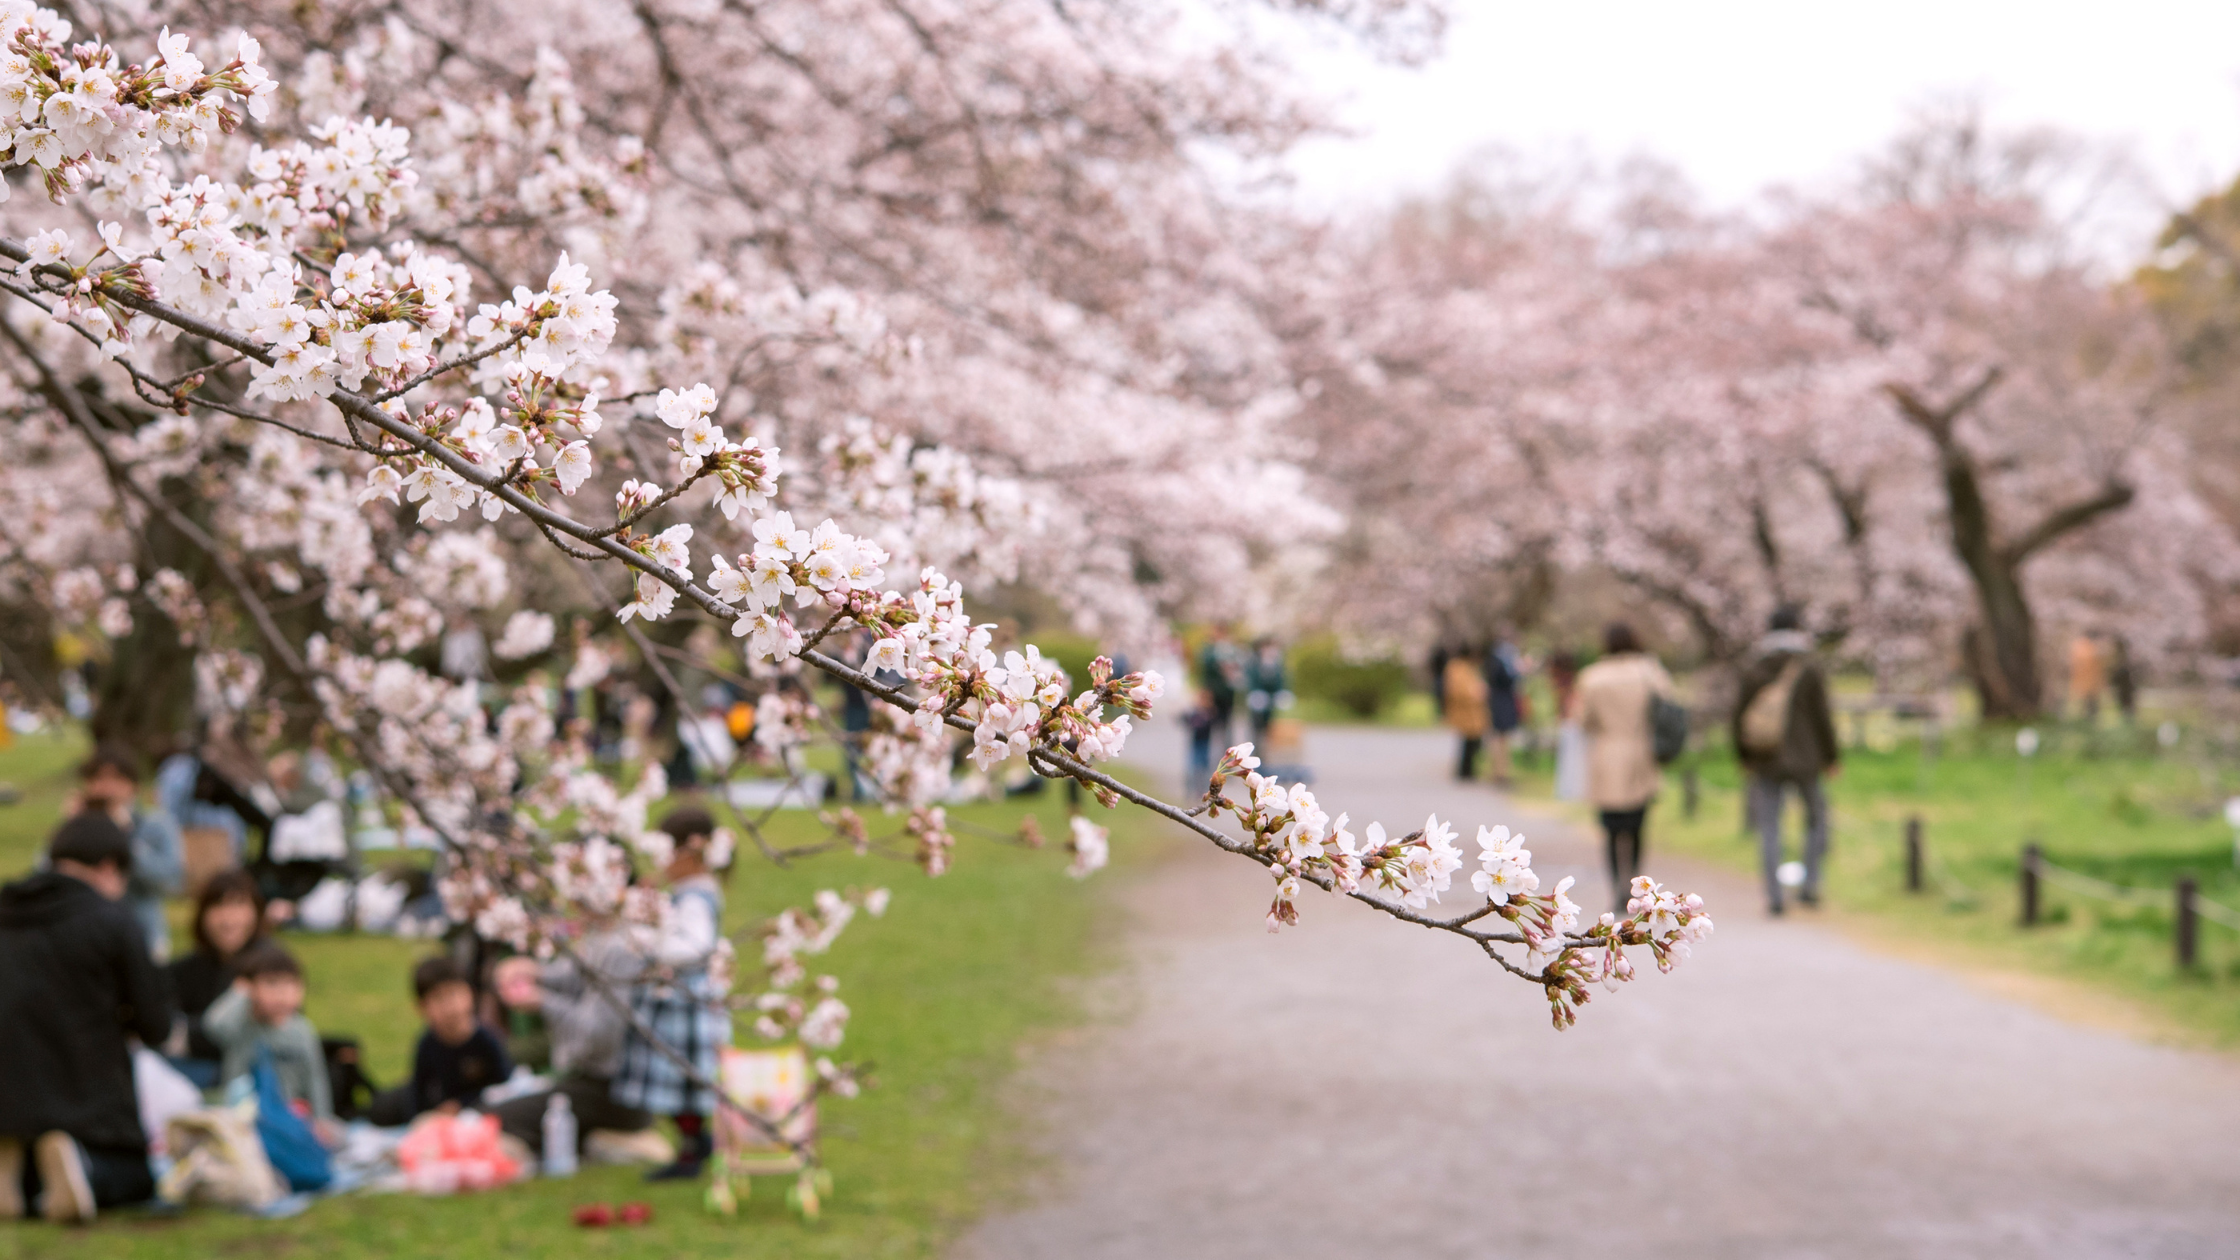 10 Fast Facts About Cherry Blossom Trees featured image